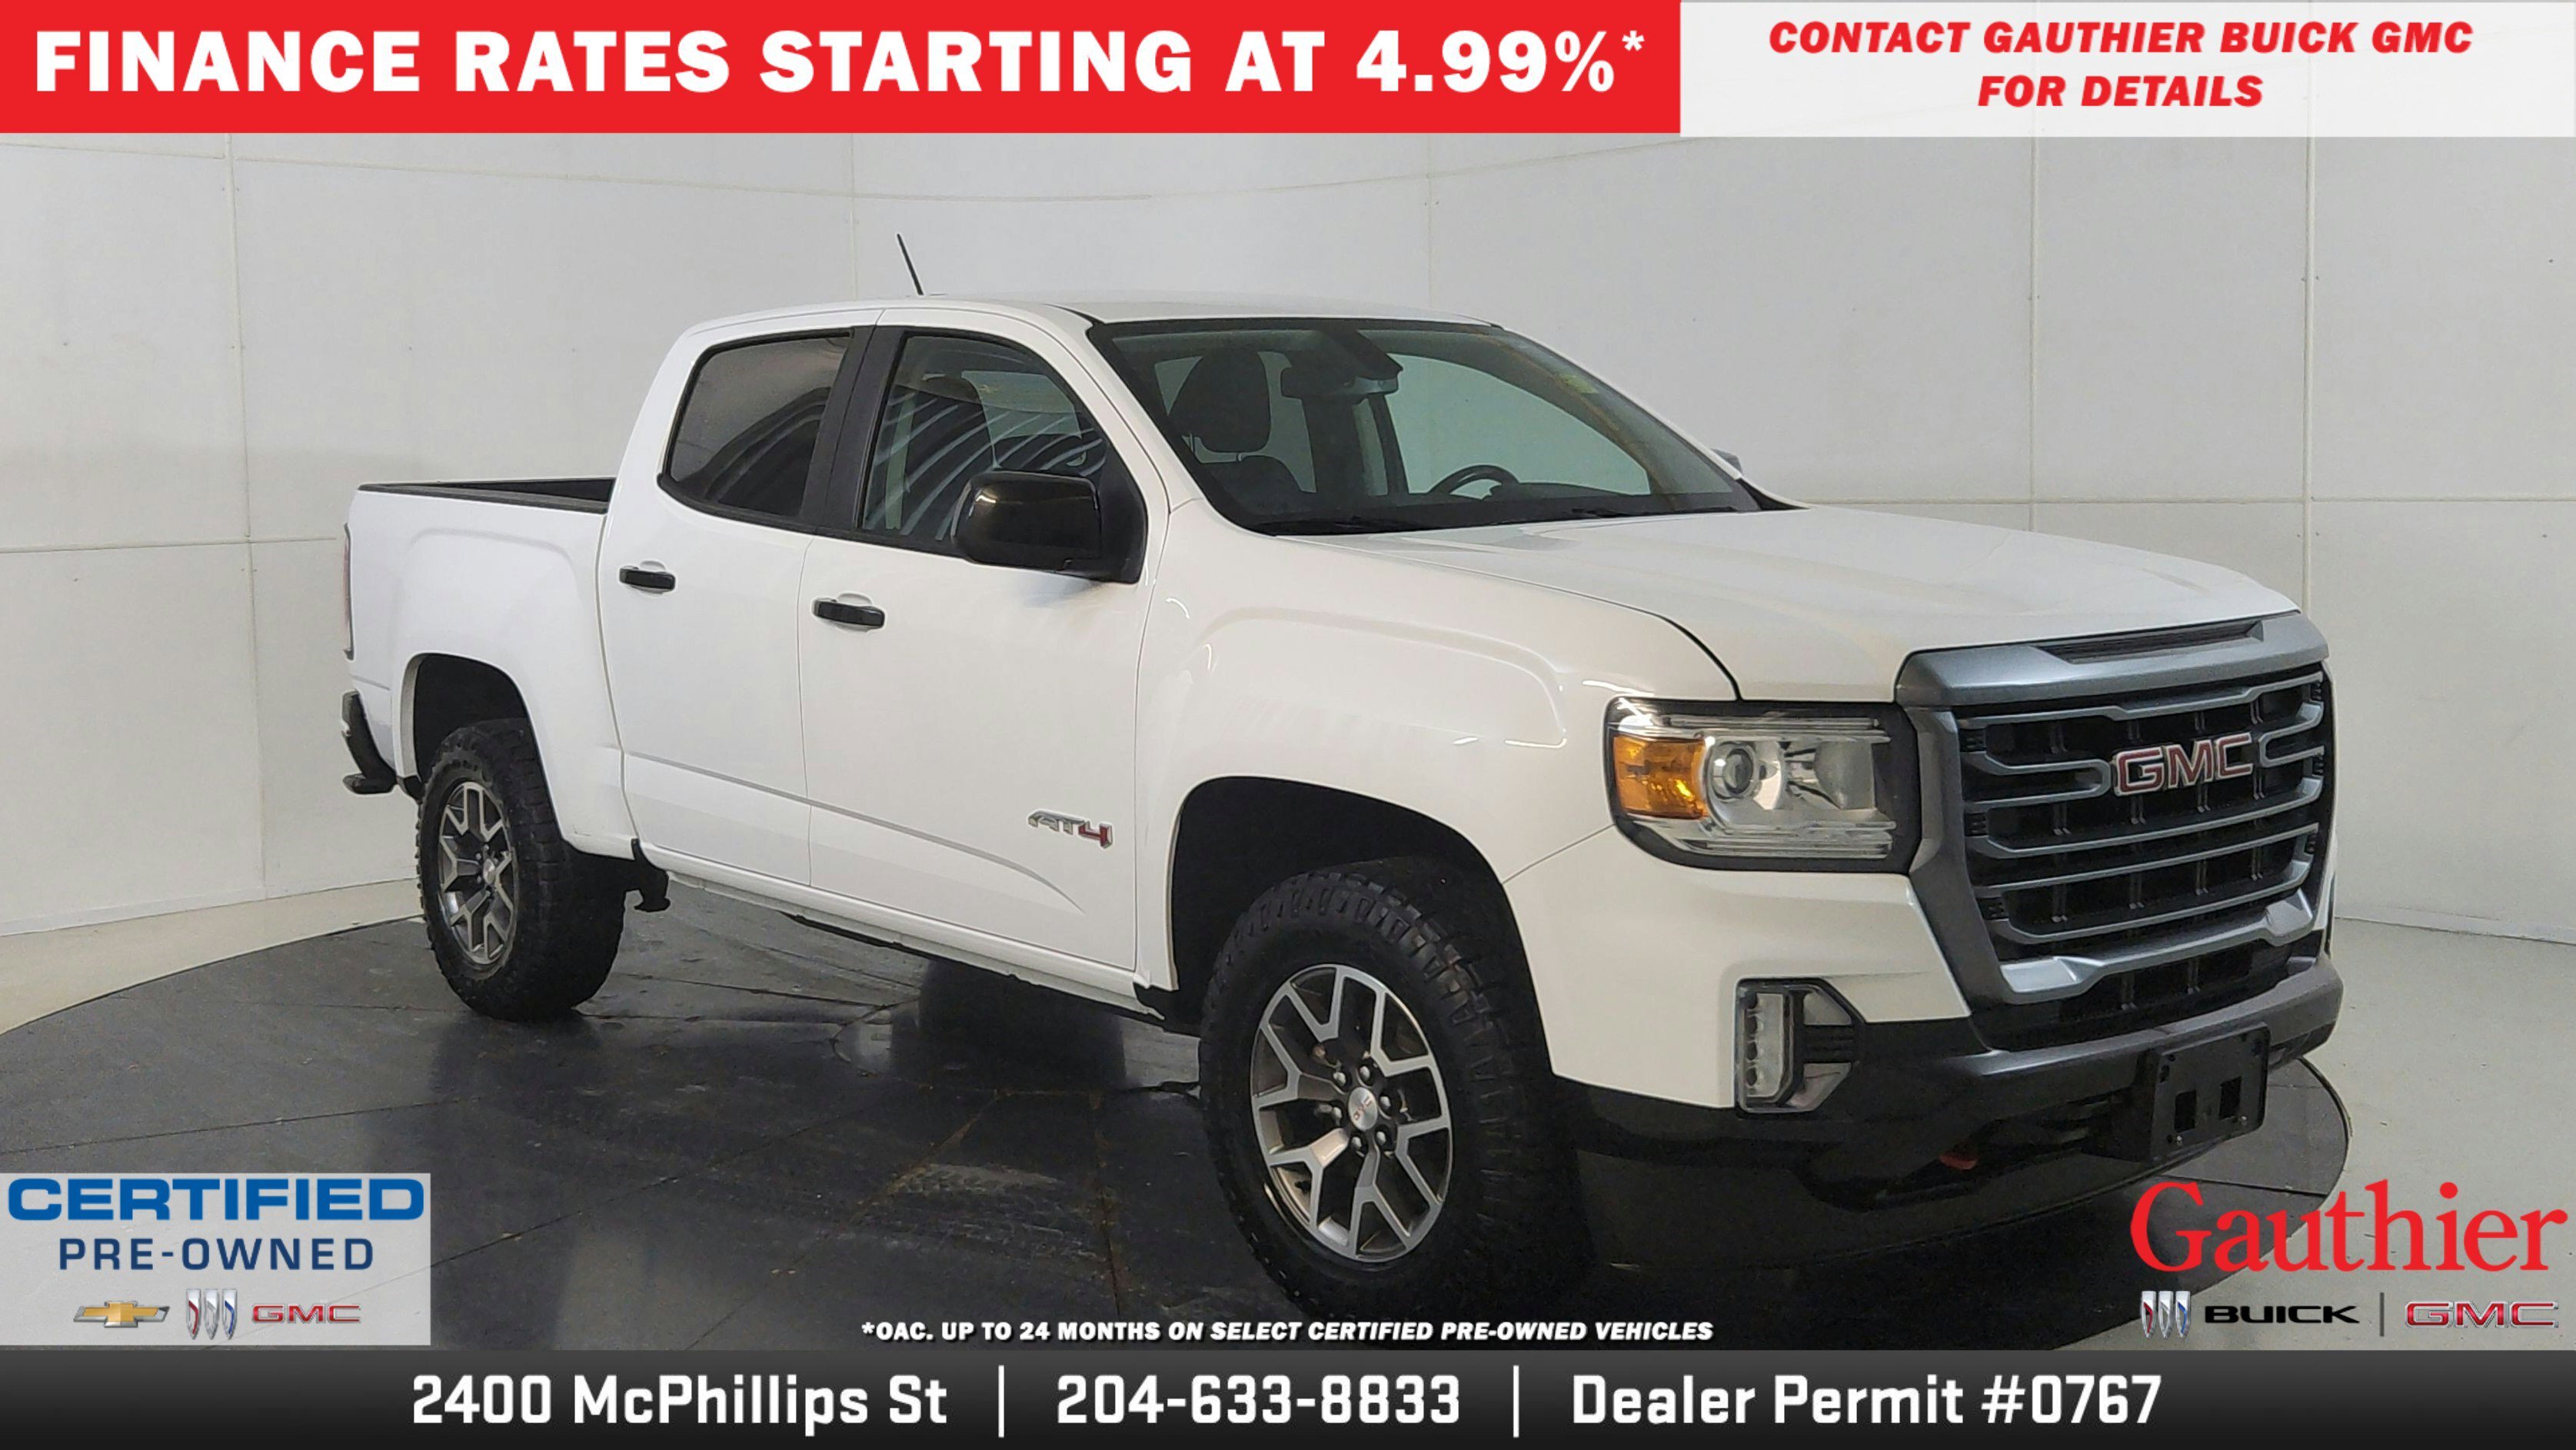 2021 GMC Canyon 4WD AT4, 3.6L V6, Heated Seats, Remote Start, Towi